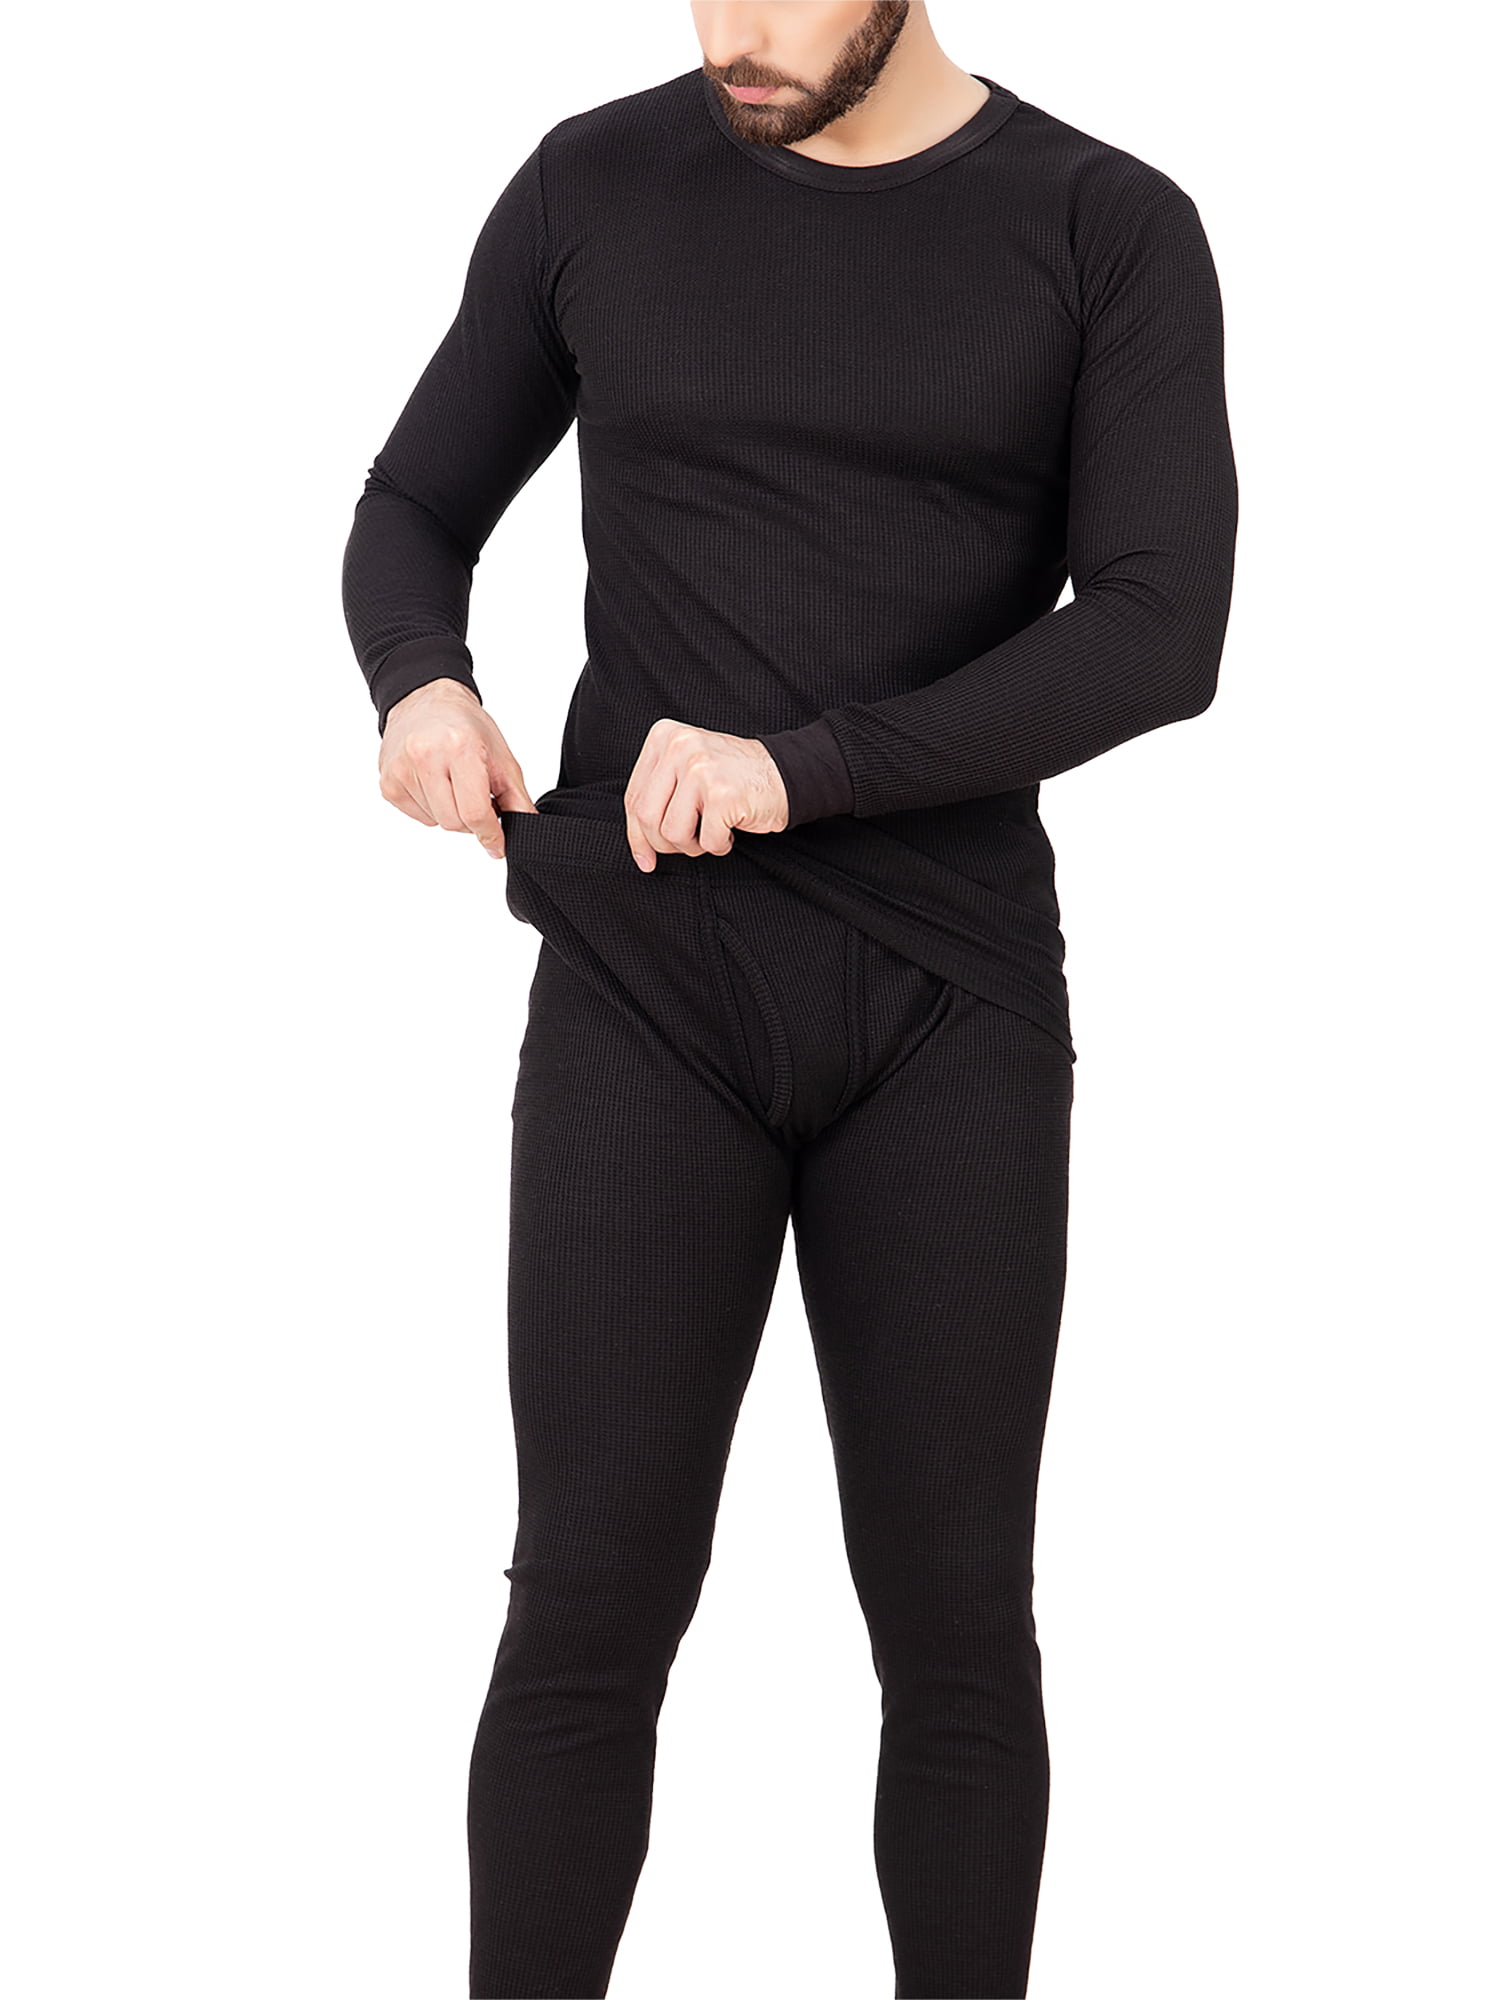 Poriff Men Tall Long Underwear Soft Thermal Shirts Insulared